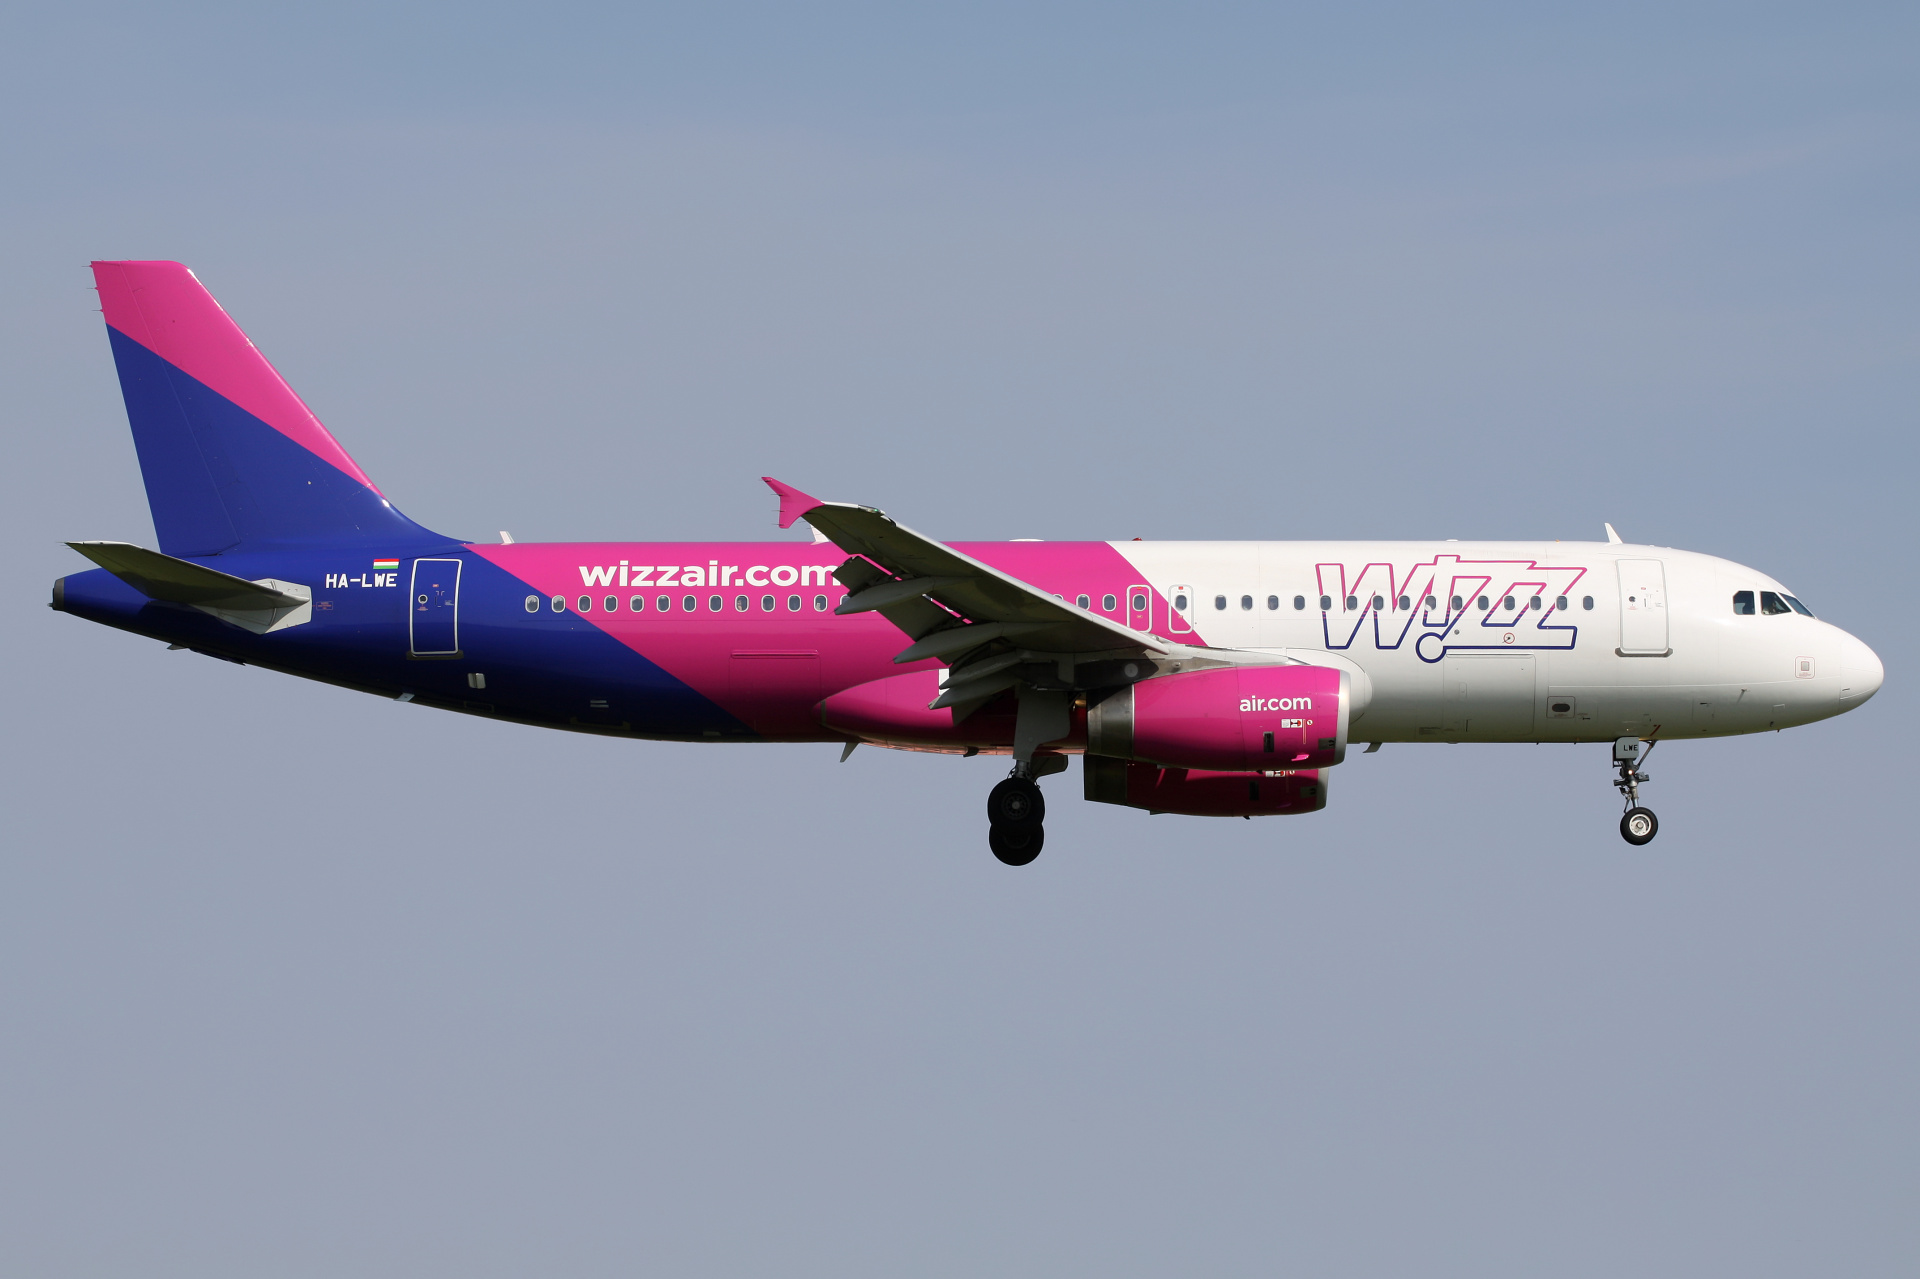 HA-LWE (new livery) (Aircraft » EPWA Spotting » Airbus A320-200 » Wizz Air)